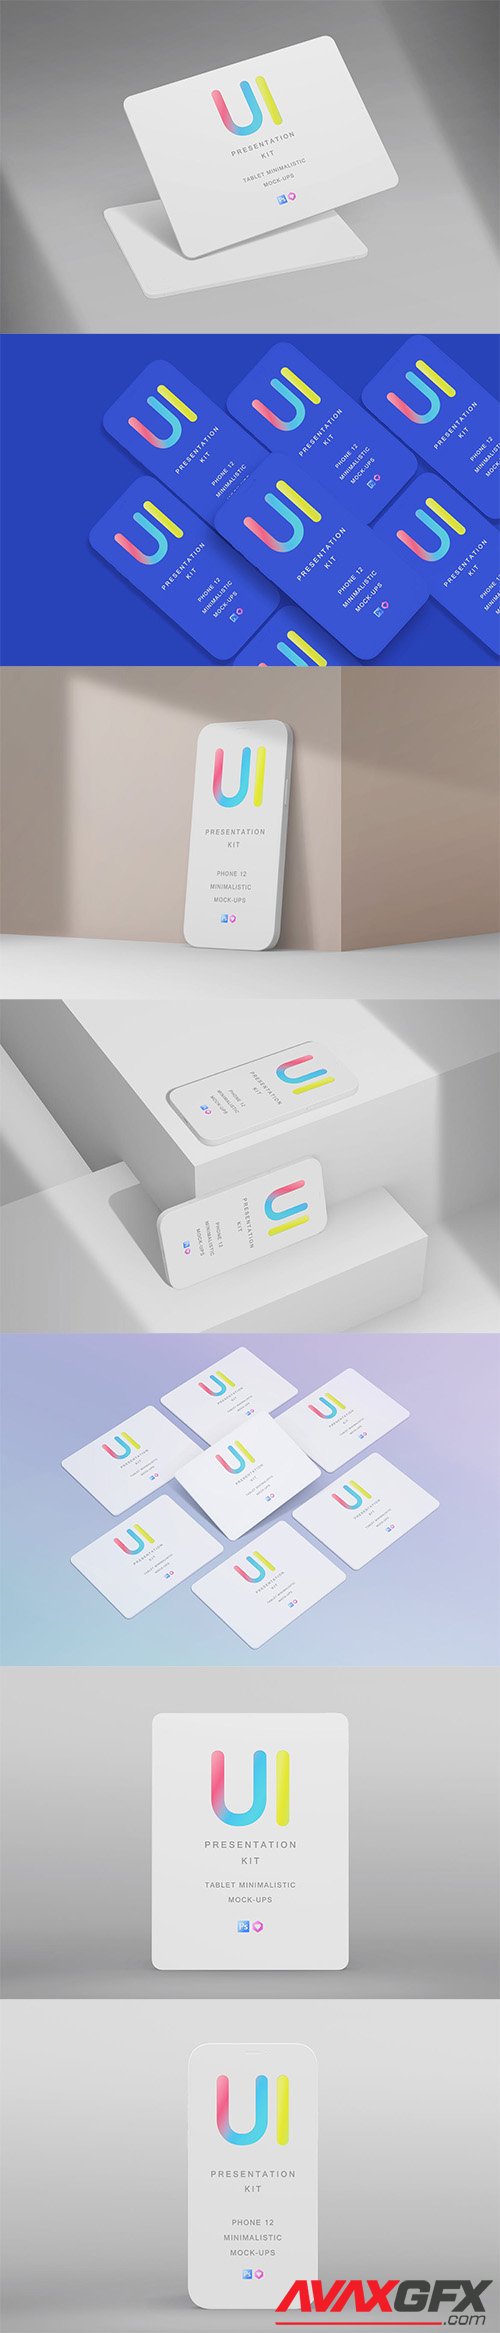 Imock Up Responsive Minimalistic Devices Kit Vol.1